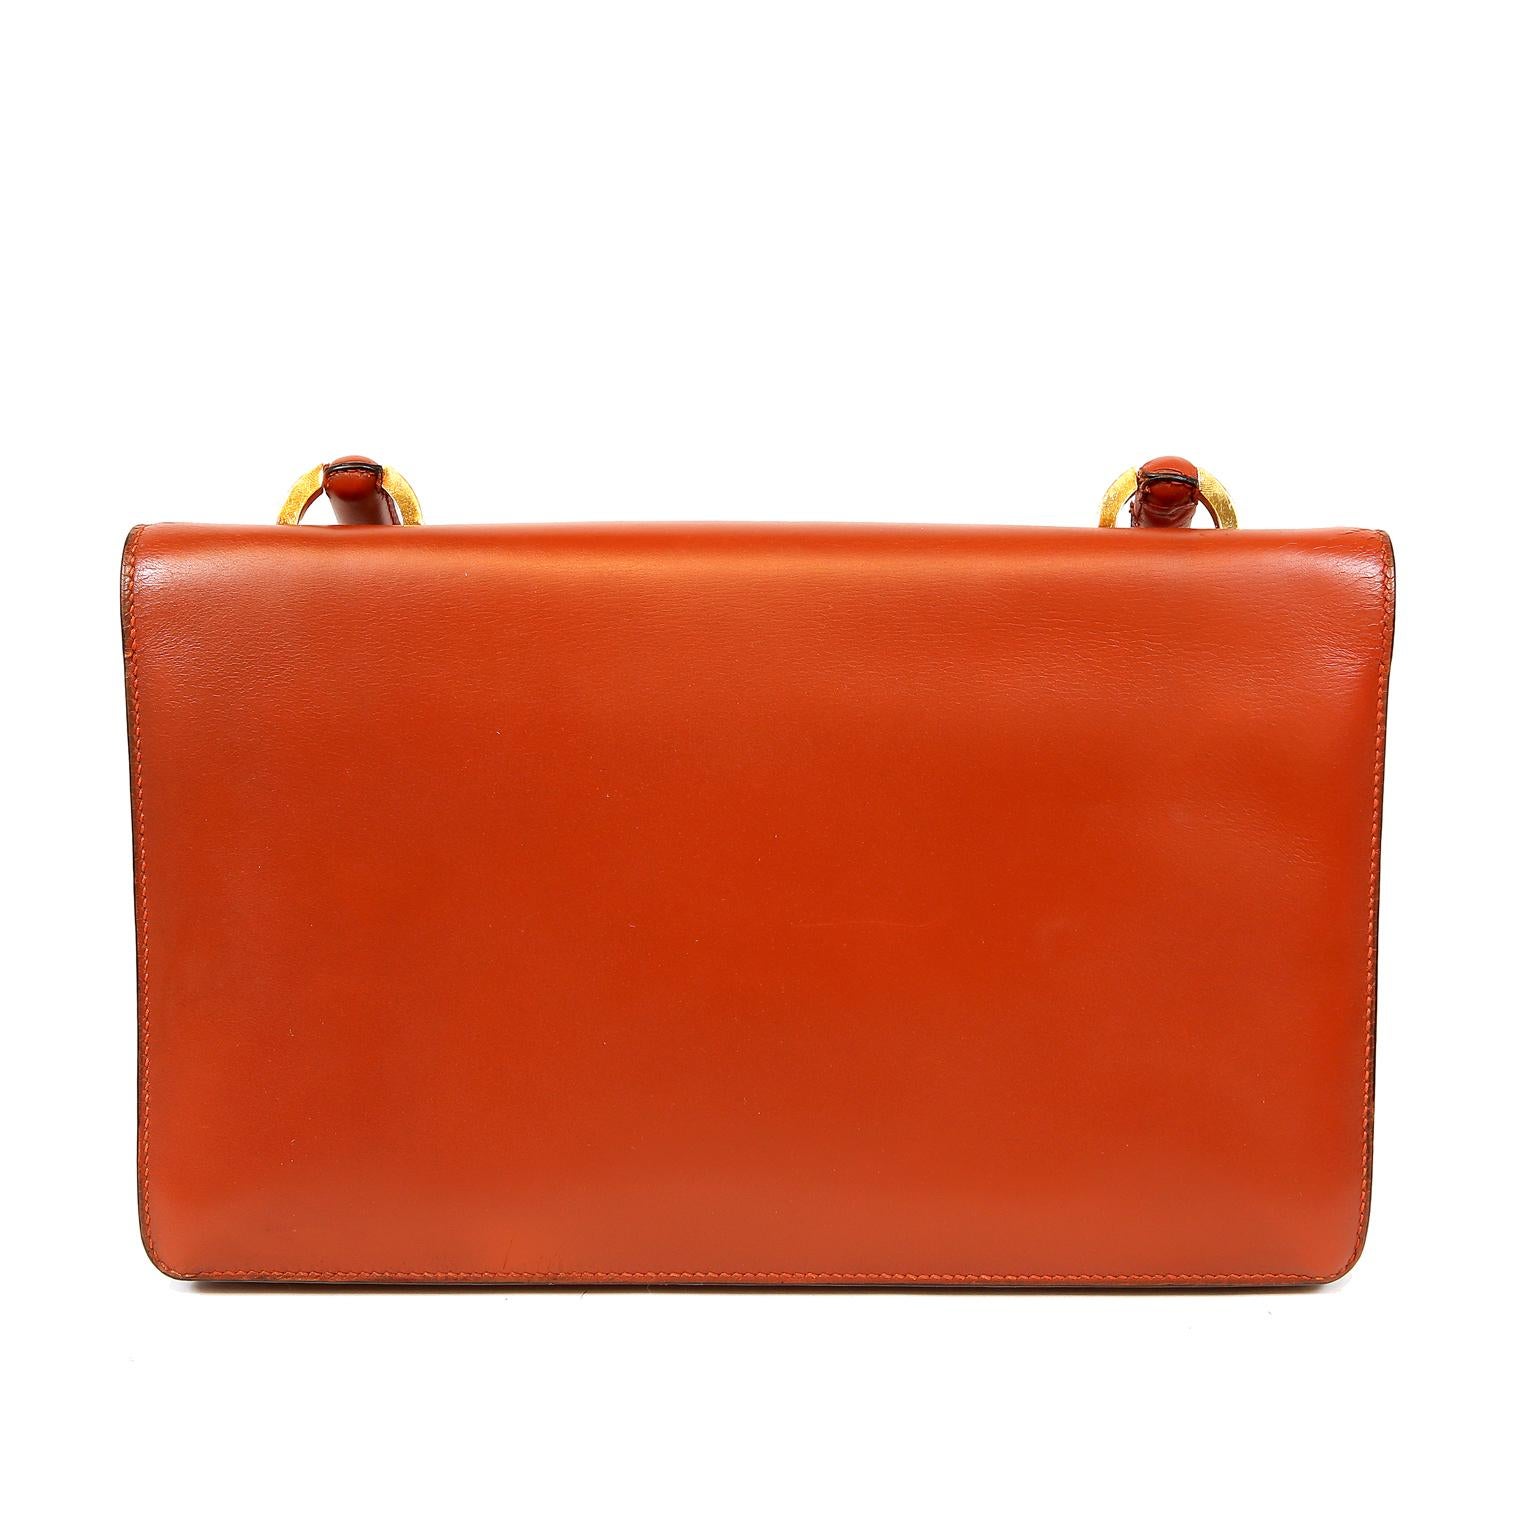 Hermès Brick Box Calf Vintage Handbag- Excellent condition.
Classic and feminine, it is an exceptional find for collectors.
Brick red smooth calf leather slim satchel with gold hardware accents.  Gold circle clasp and rounded top handle.   Leather